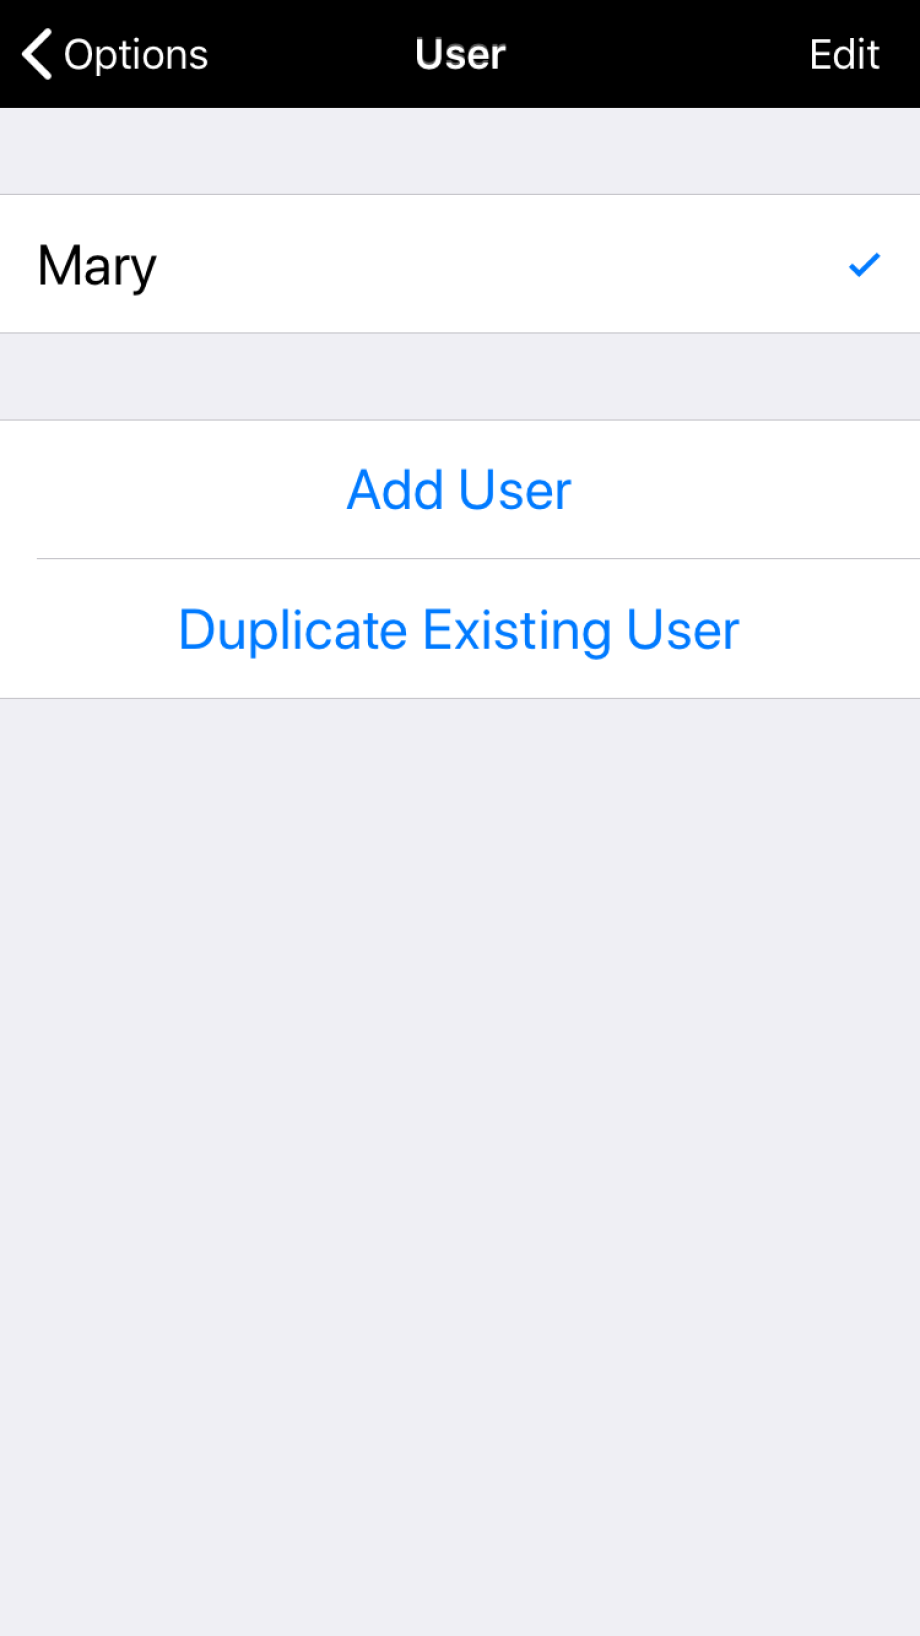 User section of Options, with ability to add new user